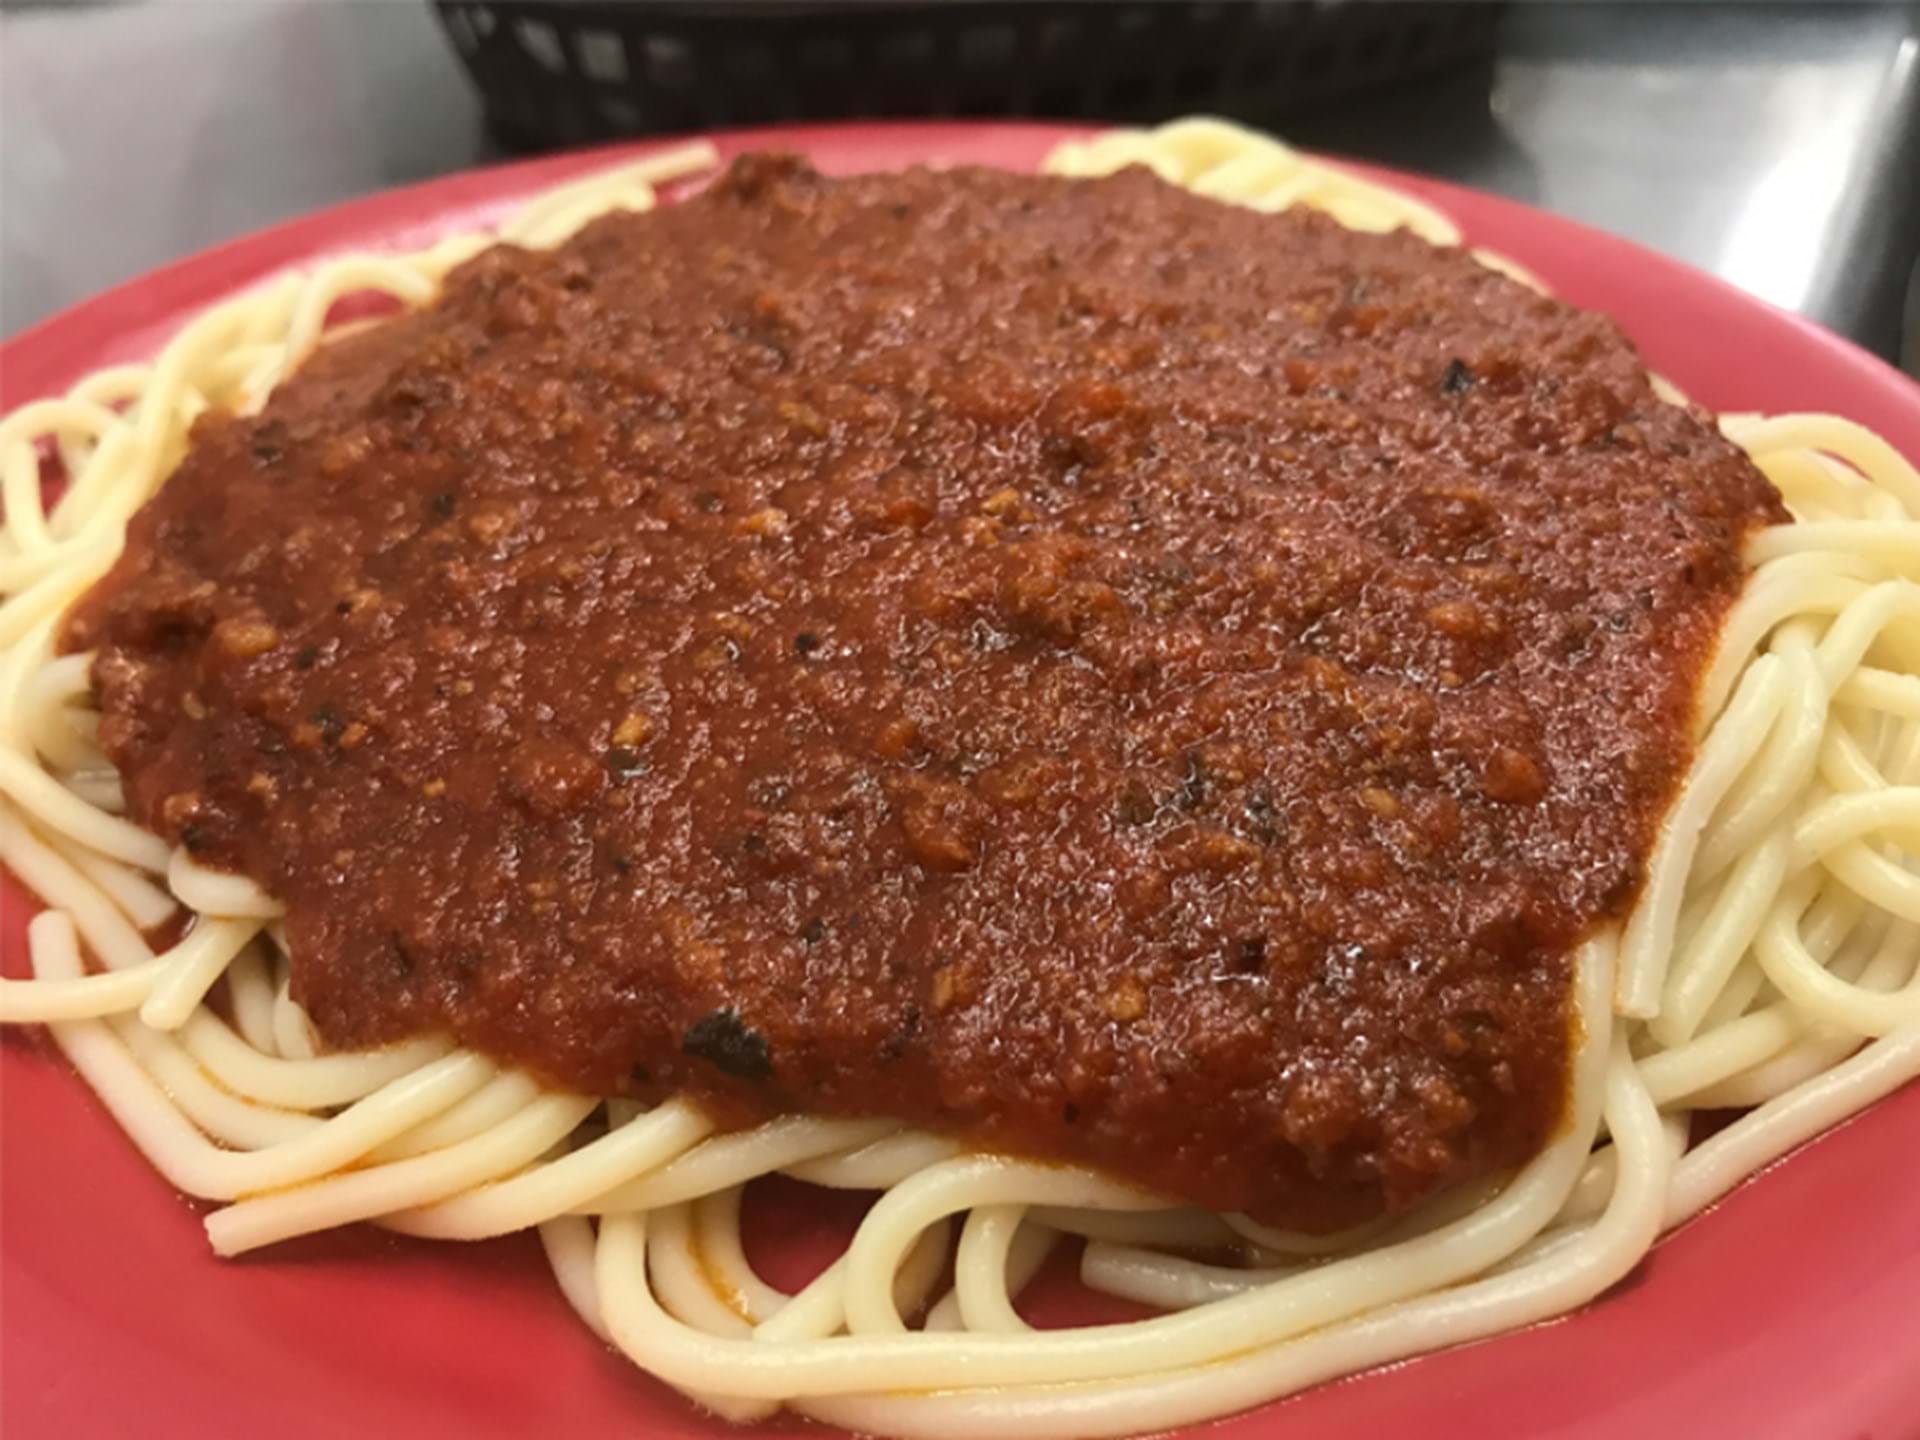 Spaghetti topped homemade meat sauce